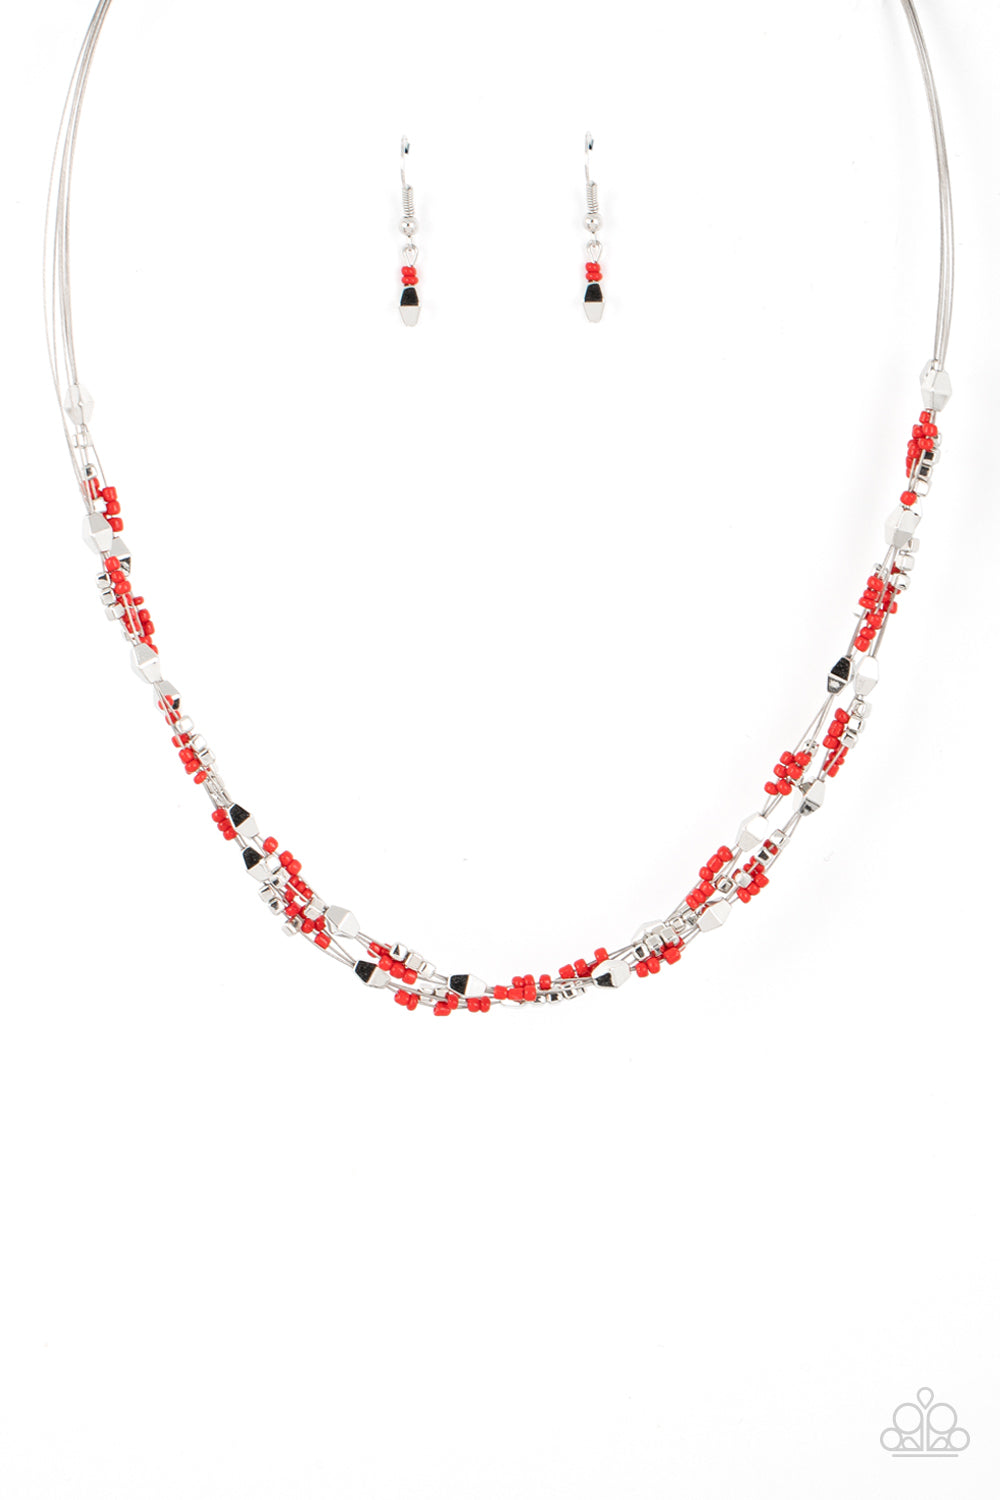 Explore Every Angle - red - Paparazzi necklace